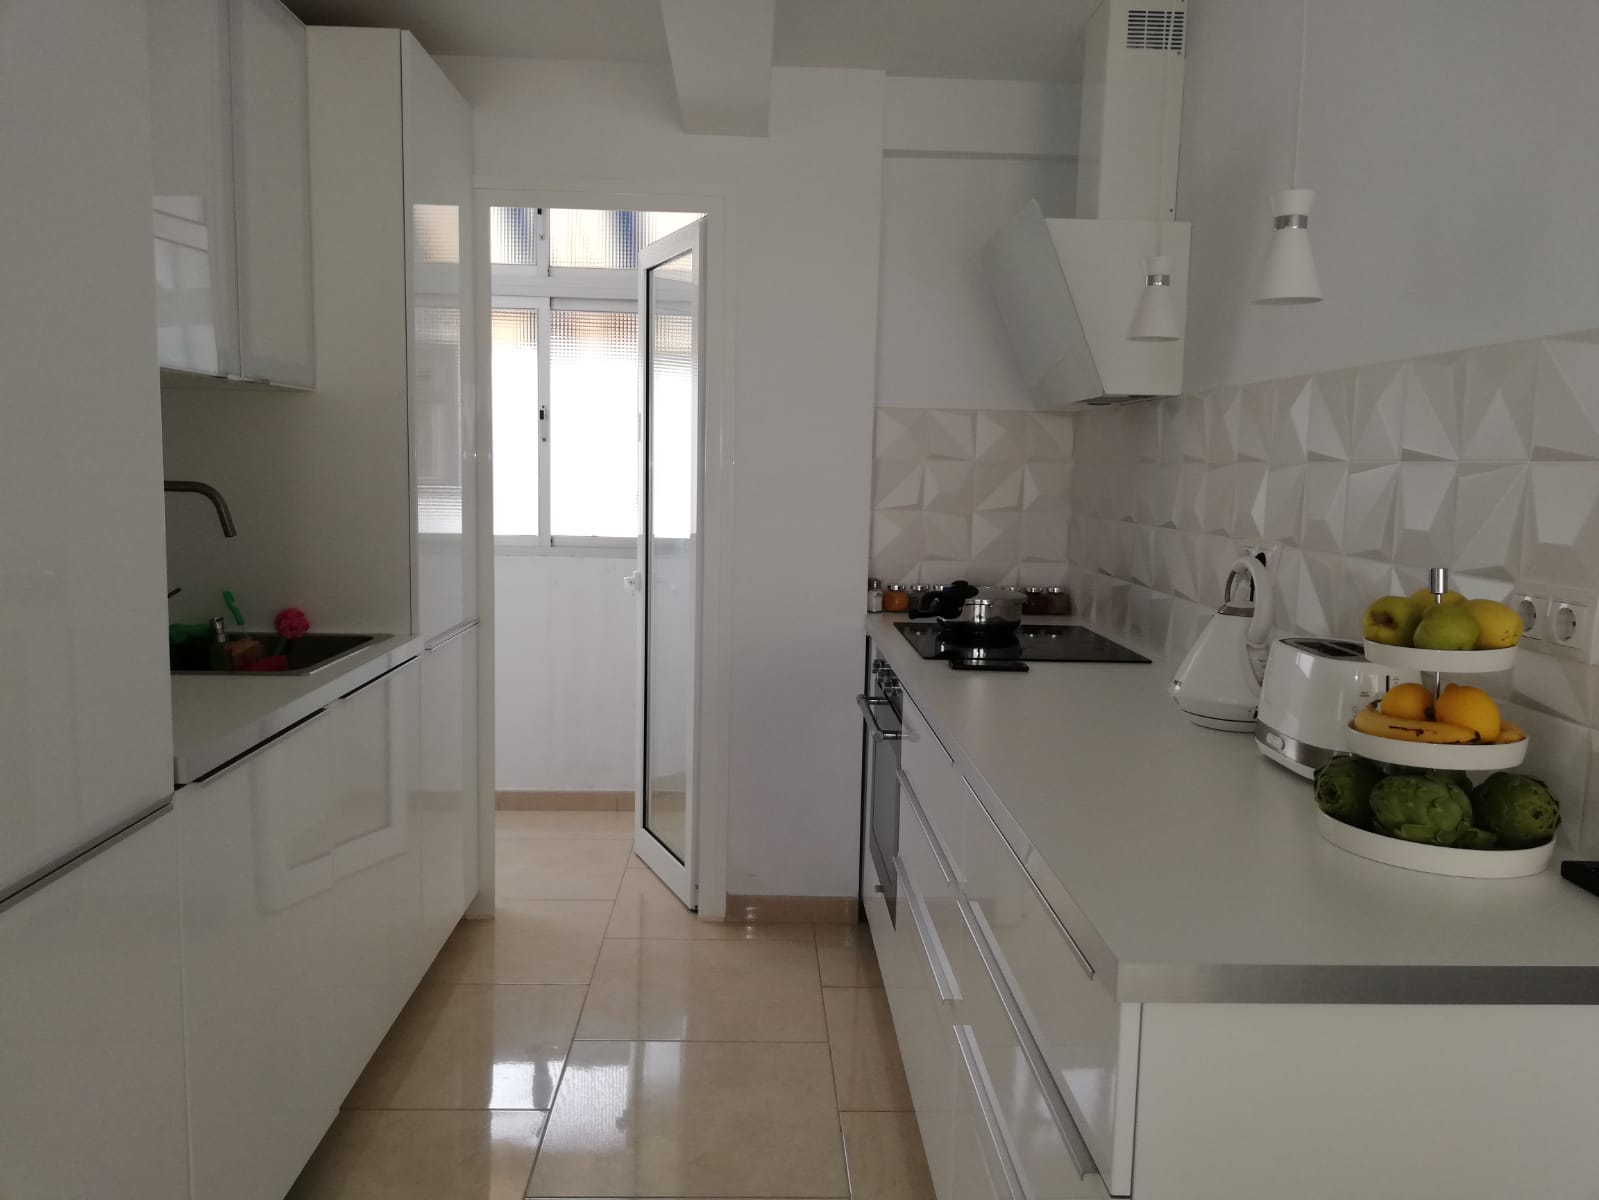 2 bedroom apartment for rent in Estepona near the beach - thumb - mibgroup.es